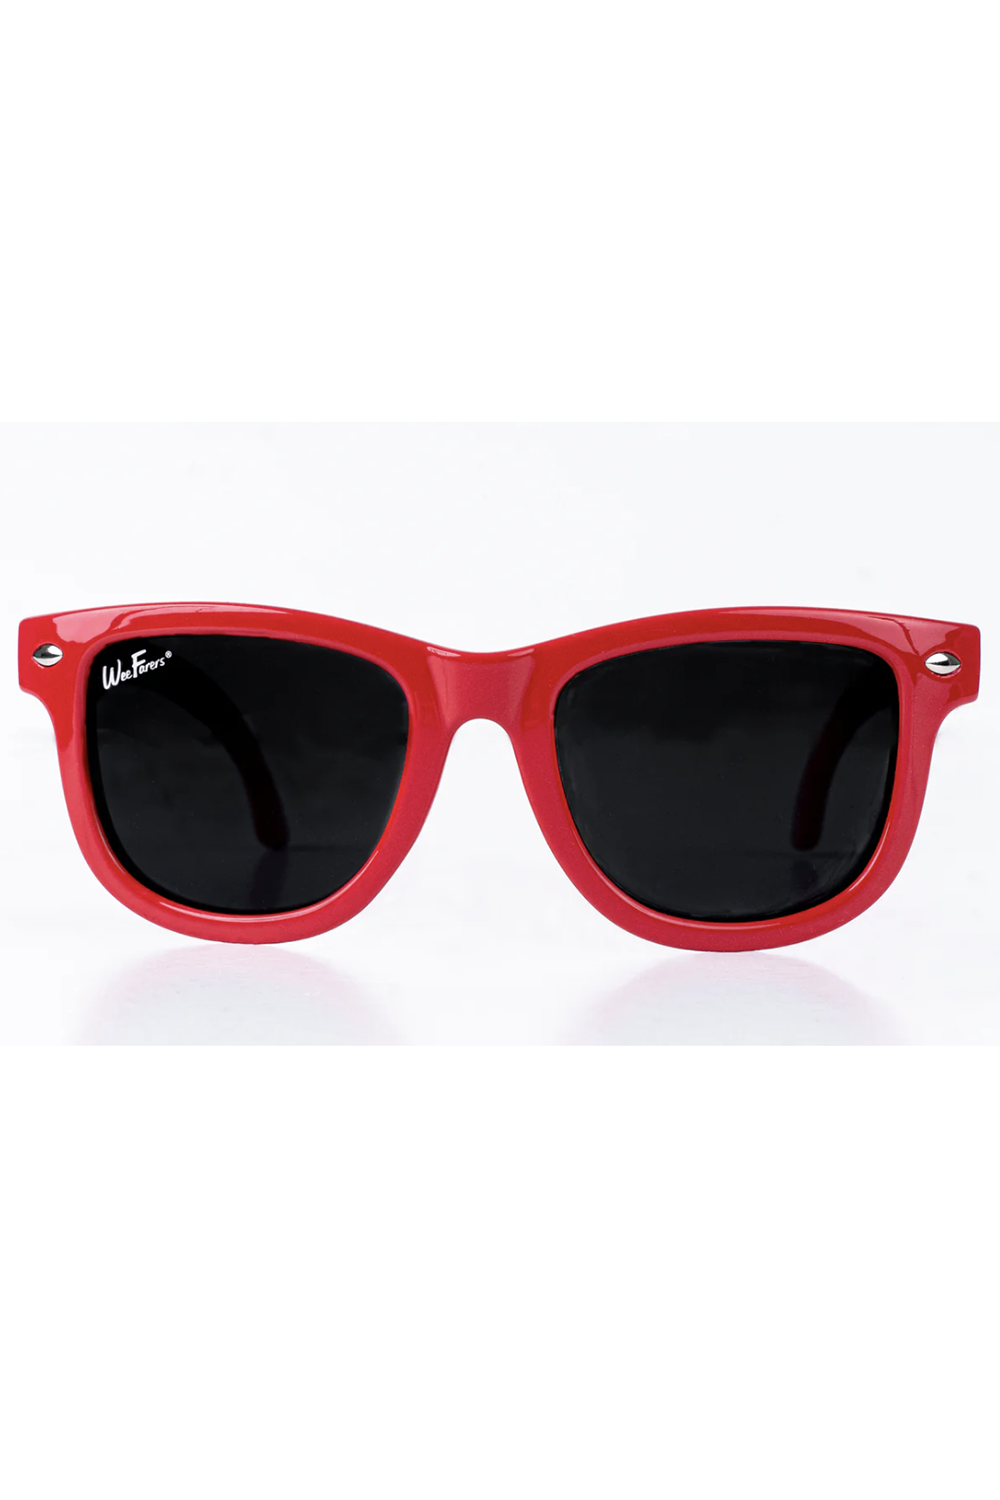 Top Eco-Friendly Fun Summer Sunglasses For Kids